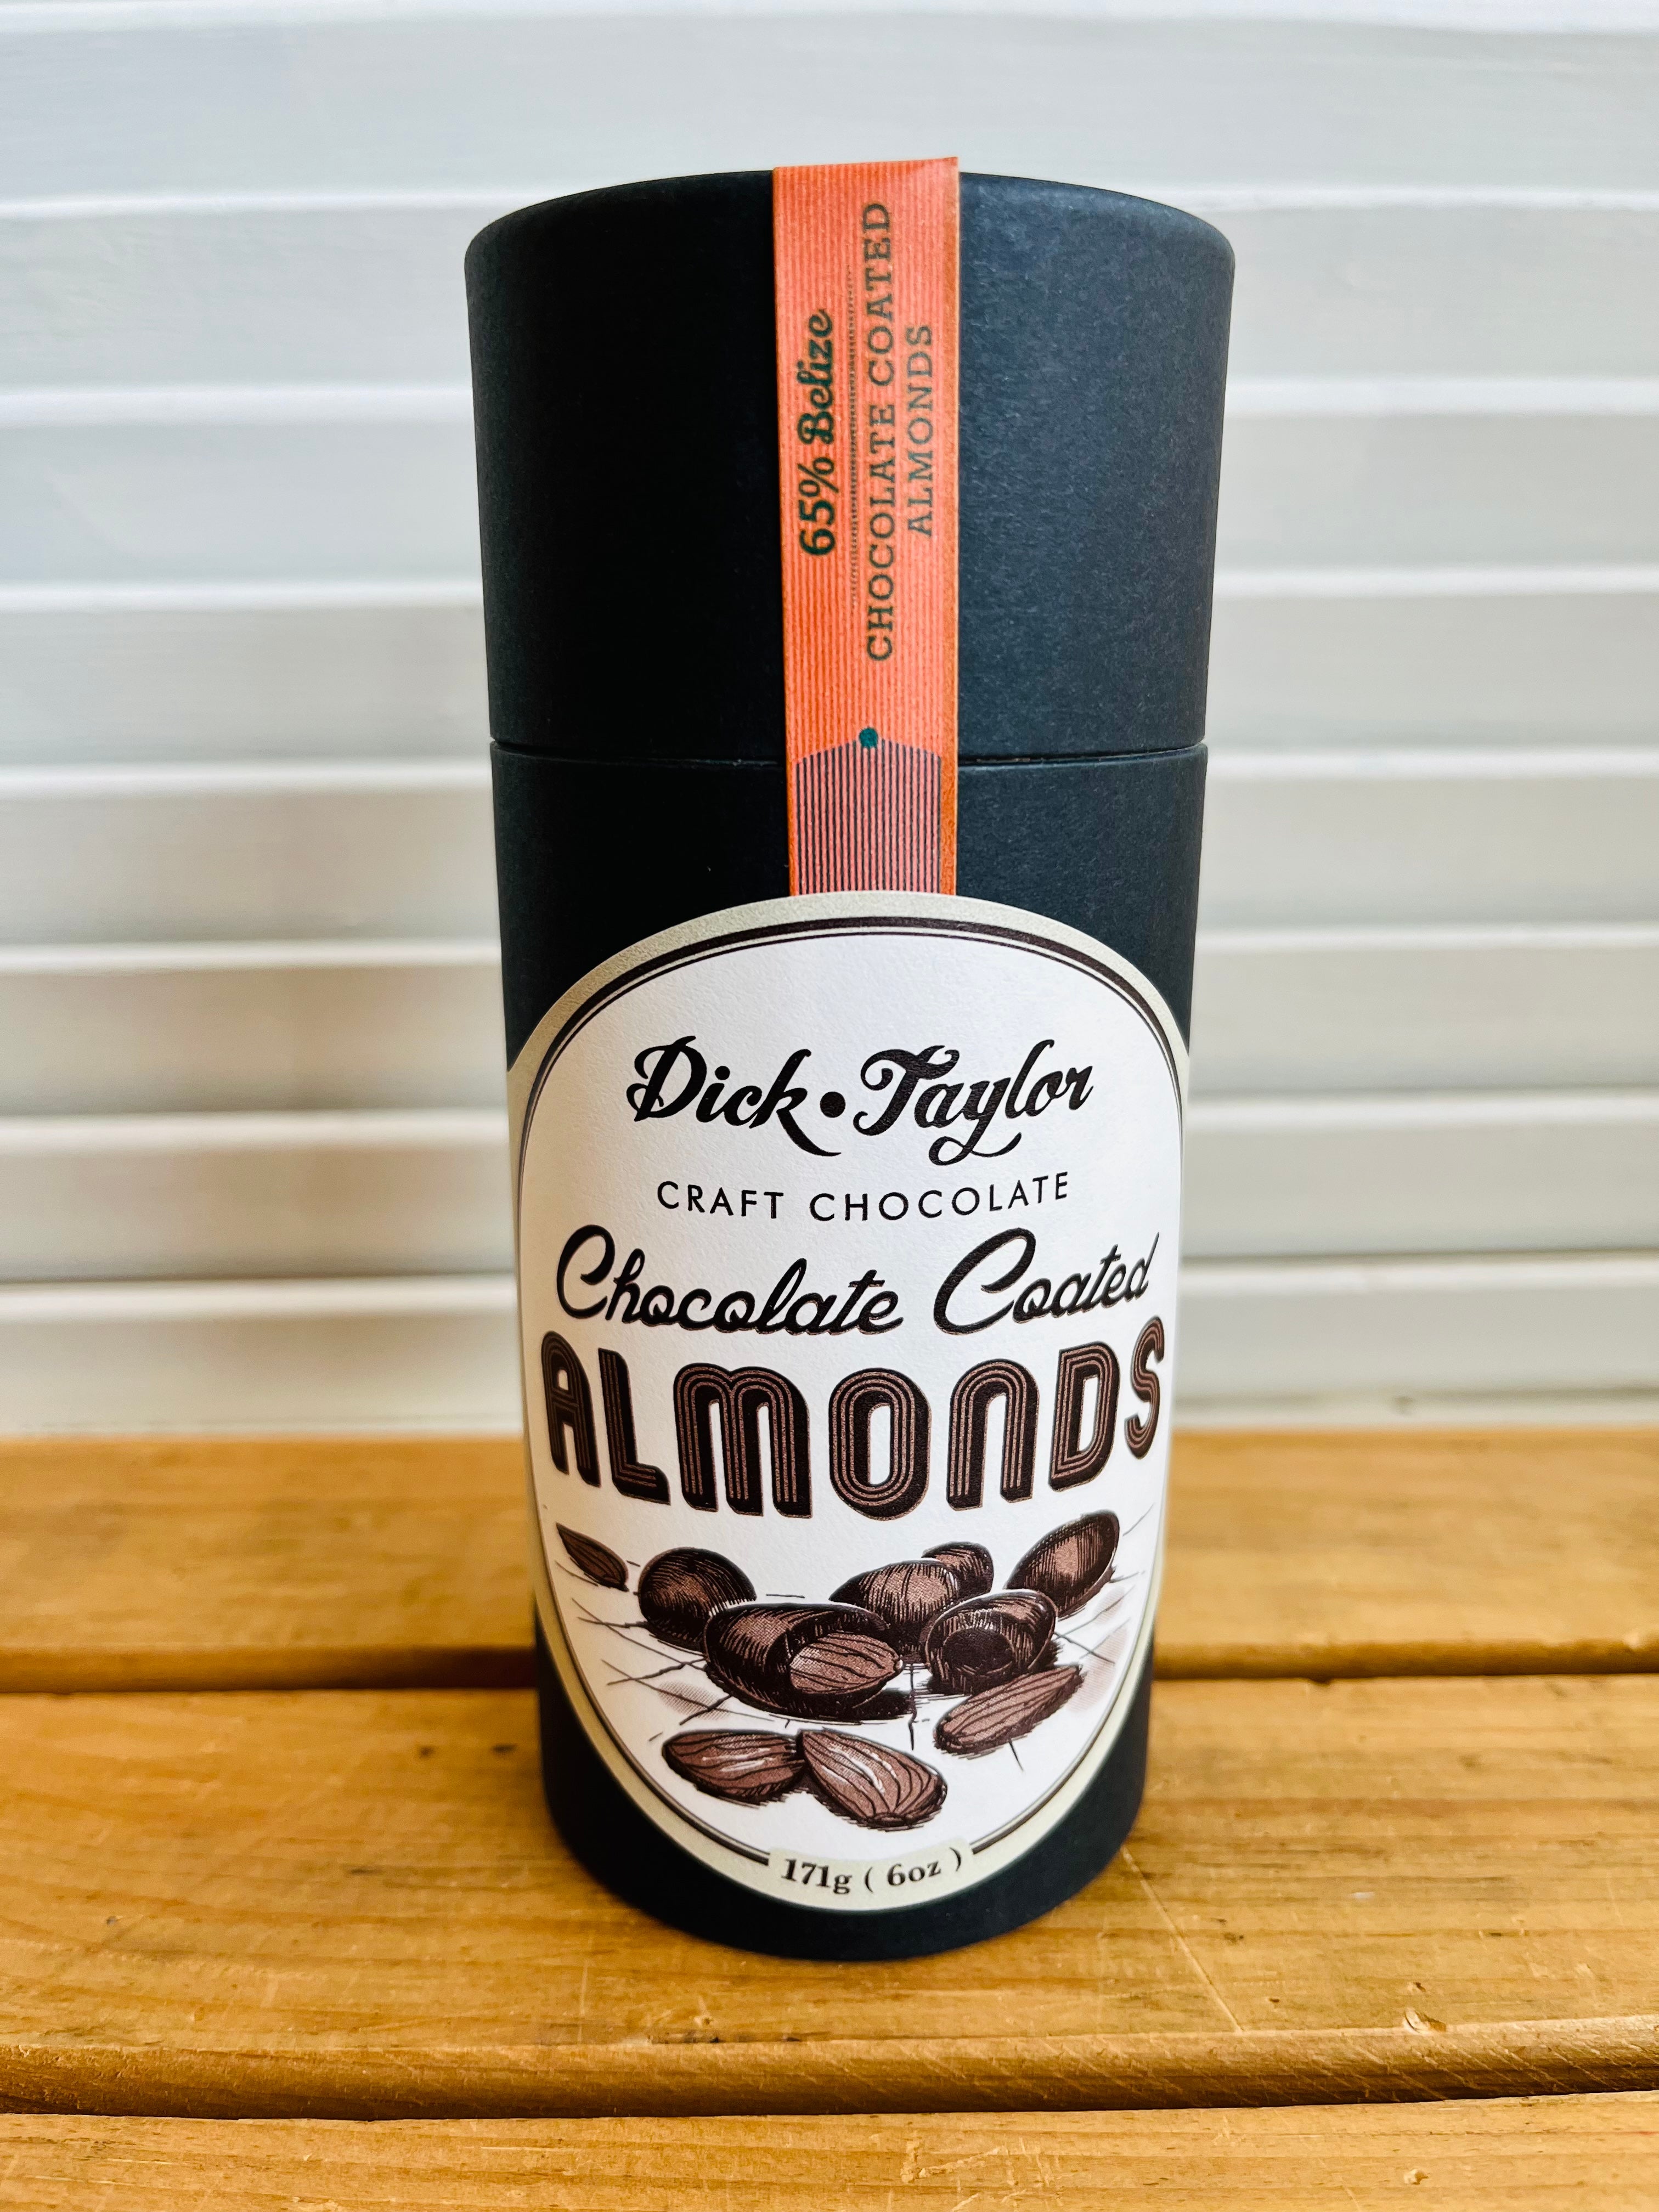 Chocolate Coated Almonds from Dick Taylor Craft Chocolate